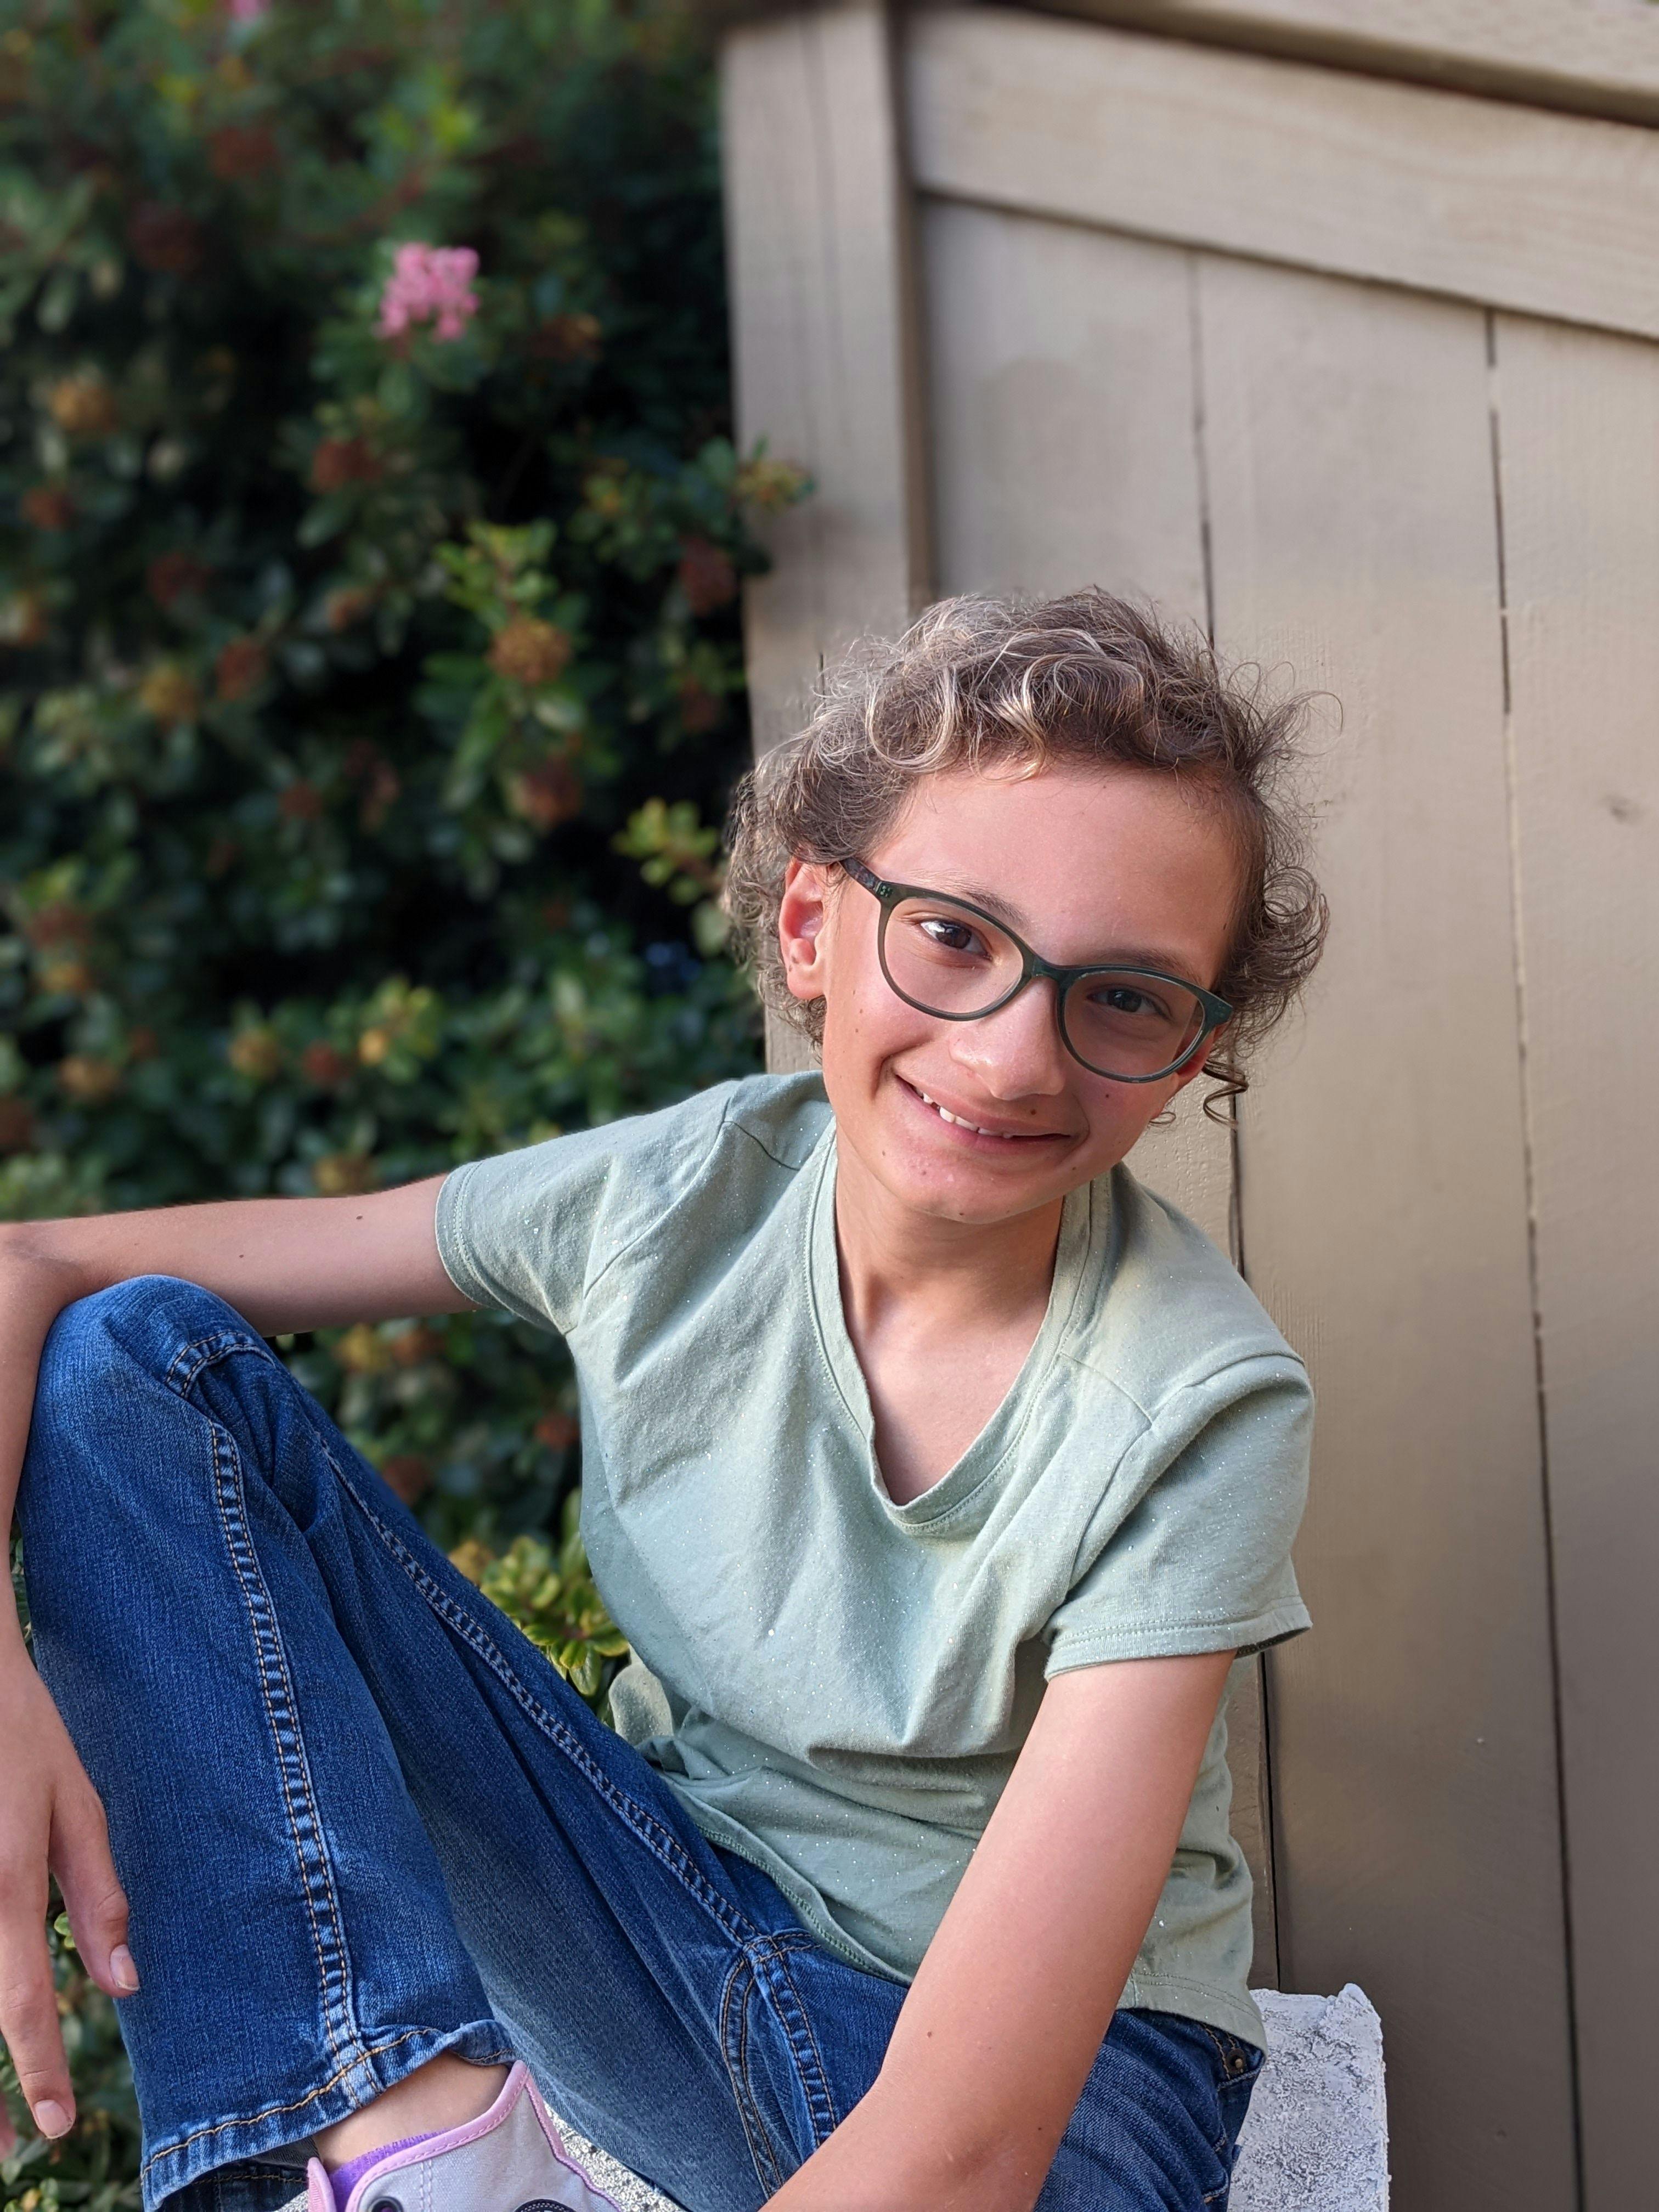 In this episode of “Cancer Horizons”, three-time neuroblastoma survivor Micah Bernstein and her father, Jeff, discuss how the childhood cancer space has changed over the past 10 years, and more.